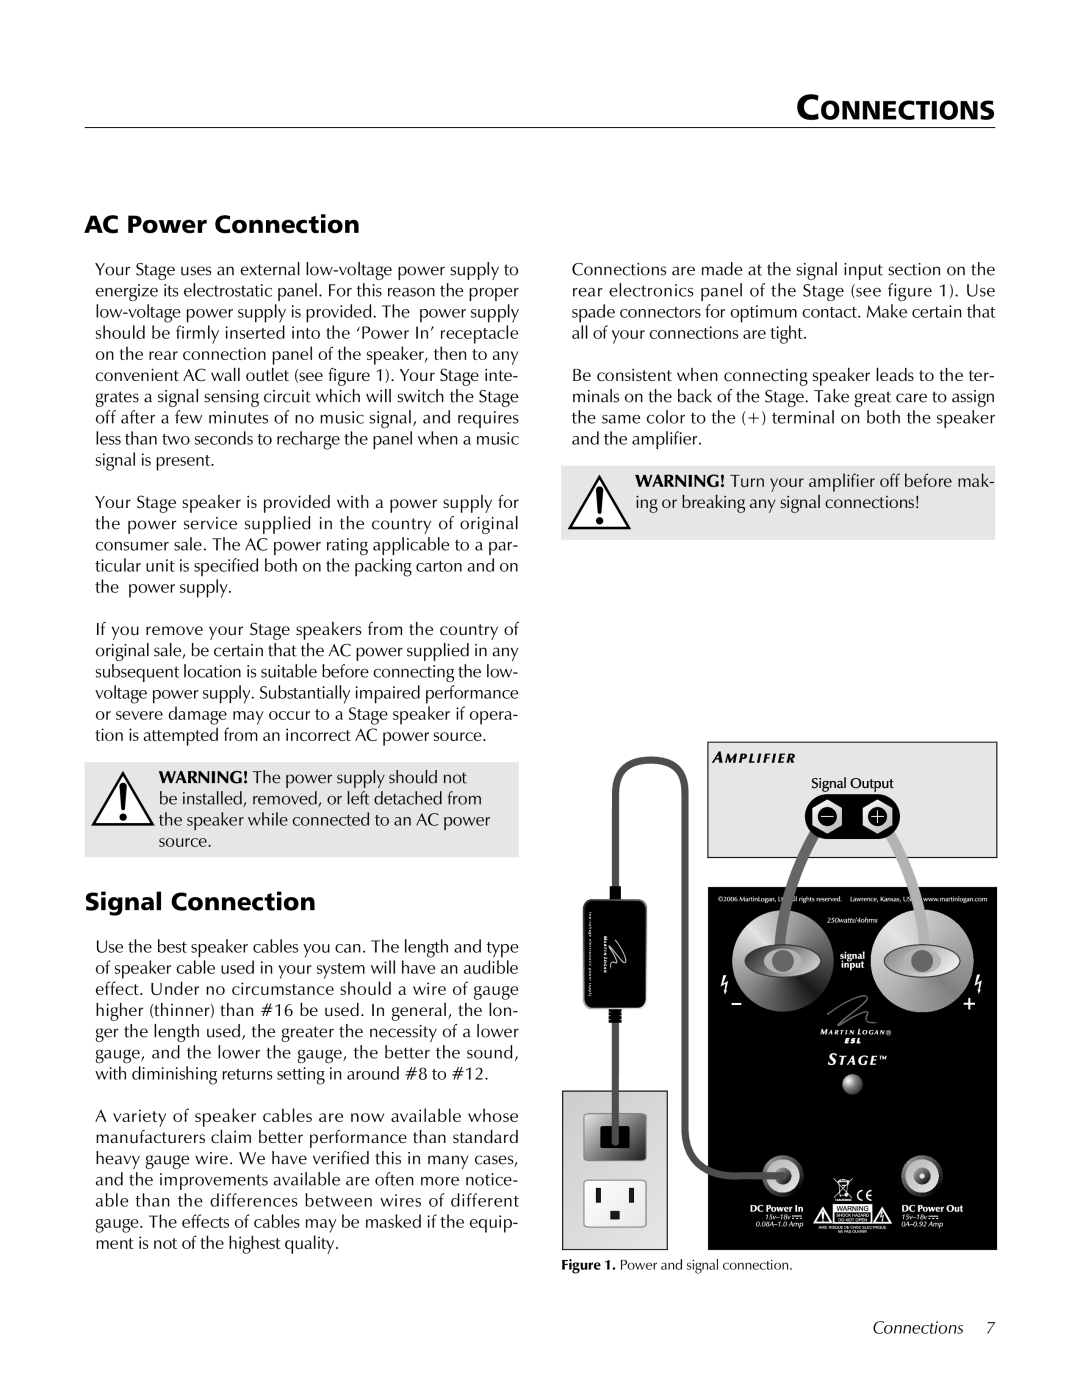 MartinLogan STAGECenter Channel Speaker user manual Connections, AC Power Connection, Signal Connection 